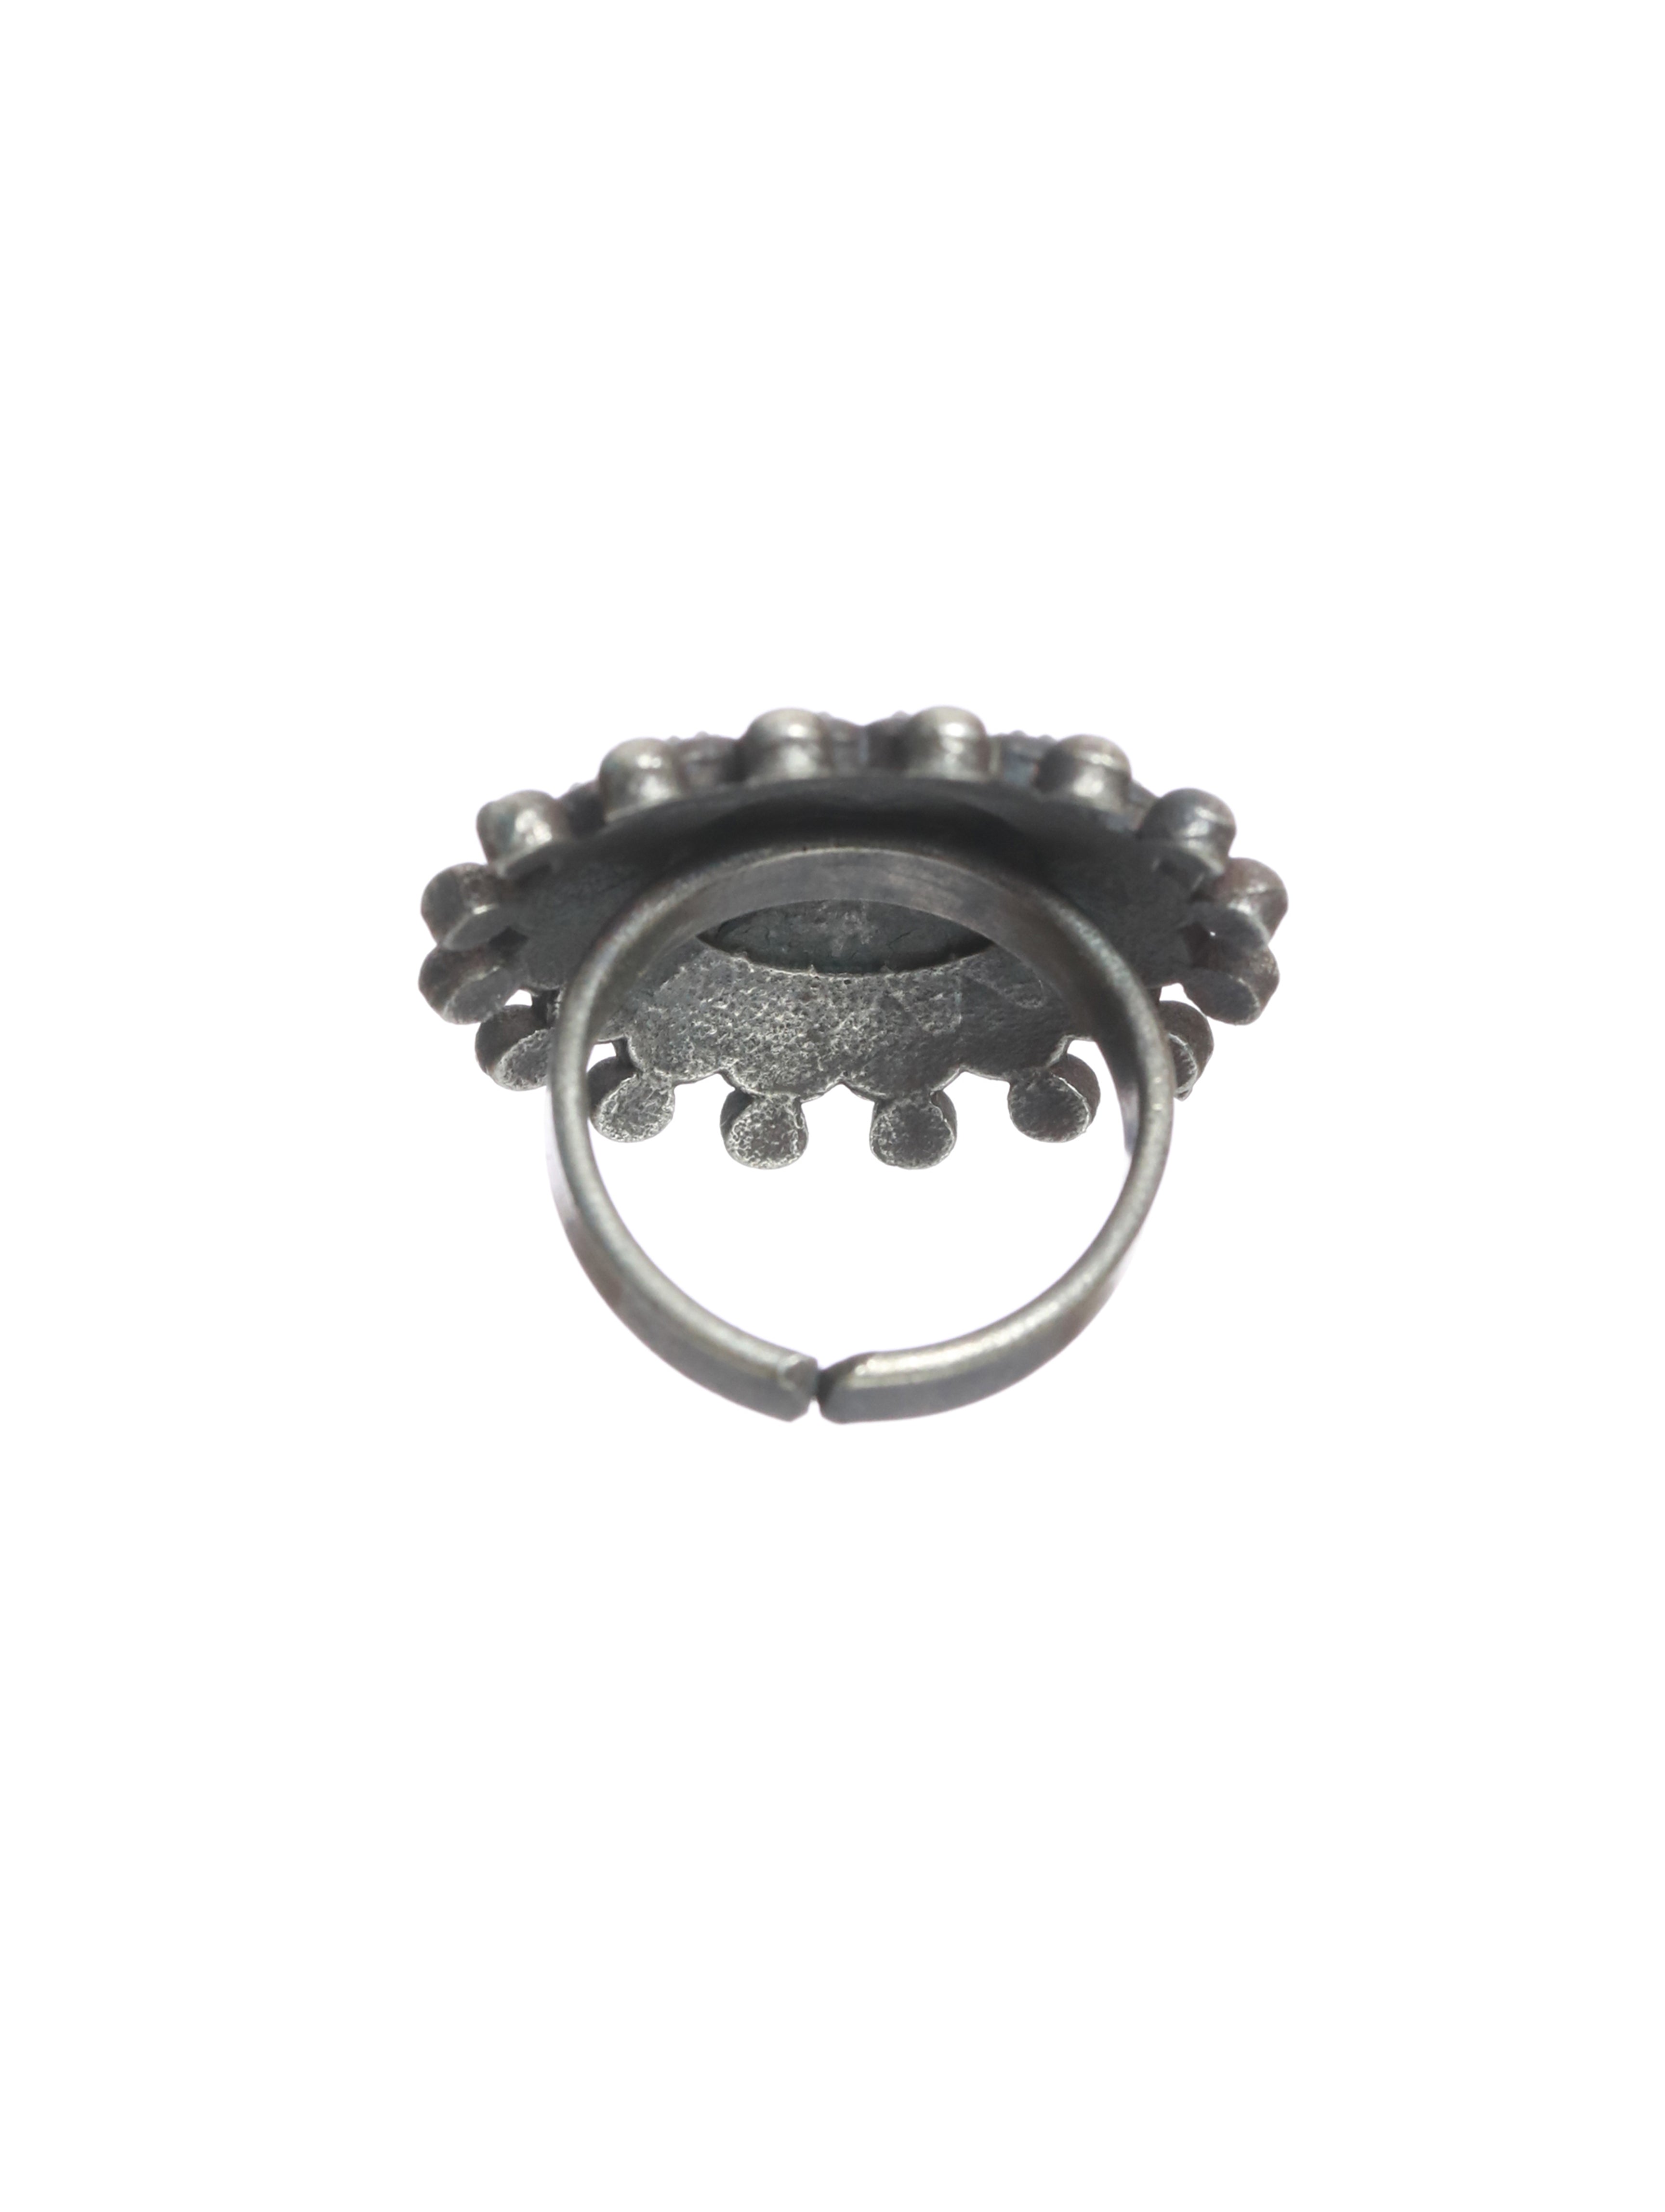 Oxidized Silver-Toned & Beaded Adjustable Finger Ring